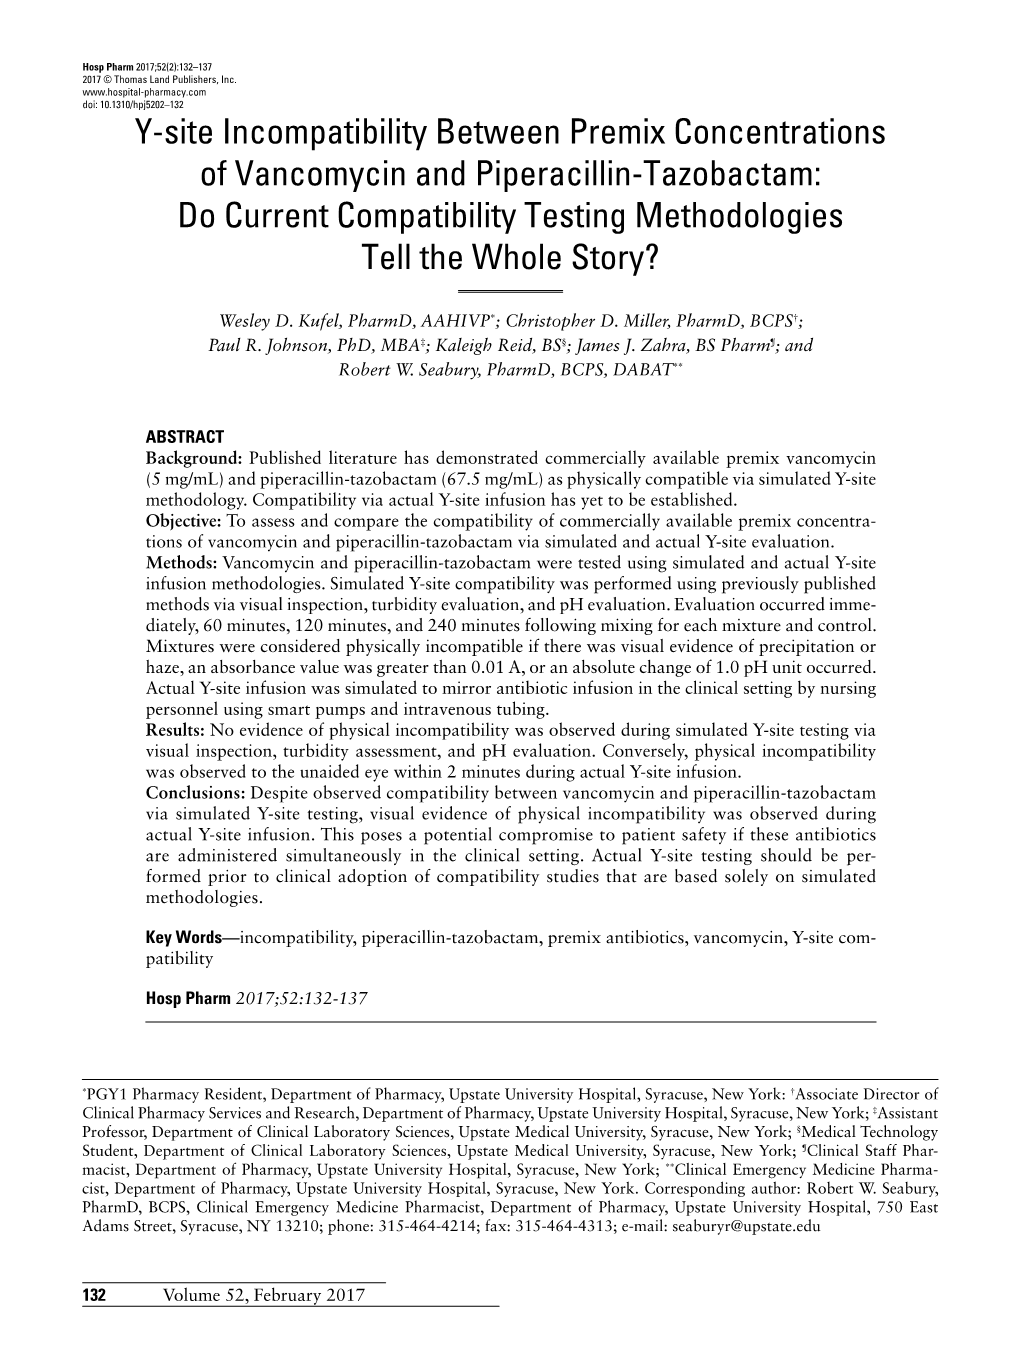 Y-Site Incompatibility Between Premix Concentrations of Vancomycin and Piperacillin-Tazobactam: Do Current Compatibility Testing Methodologies Tell the Whole Story?